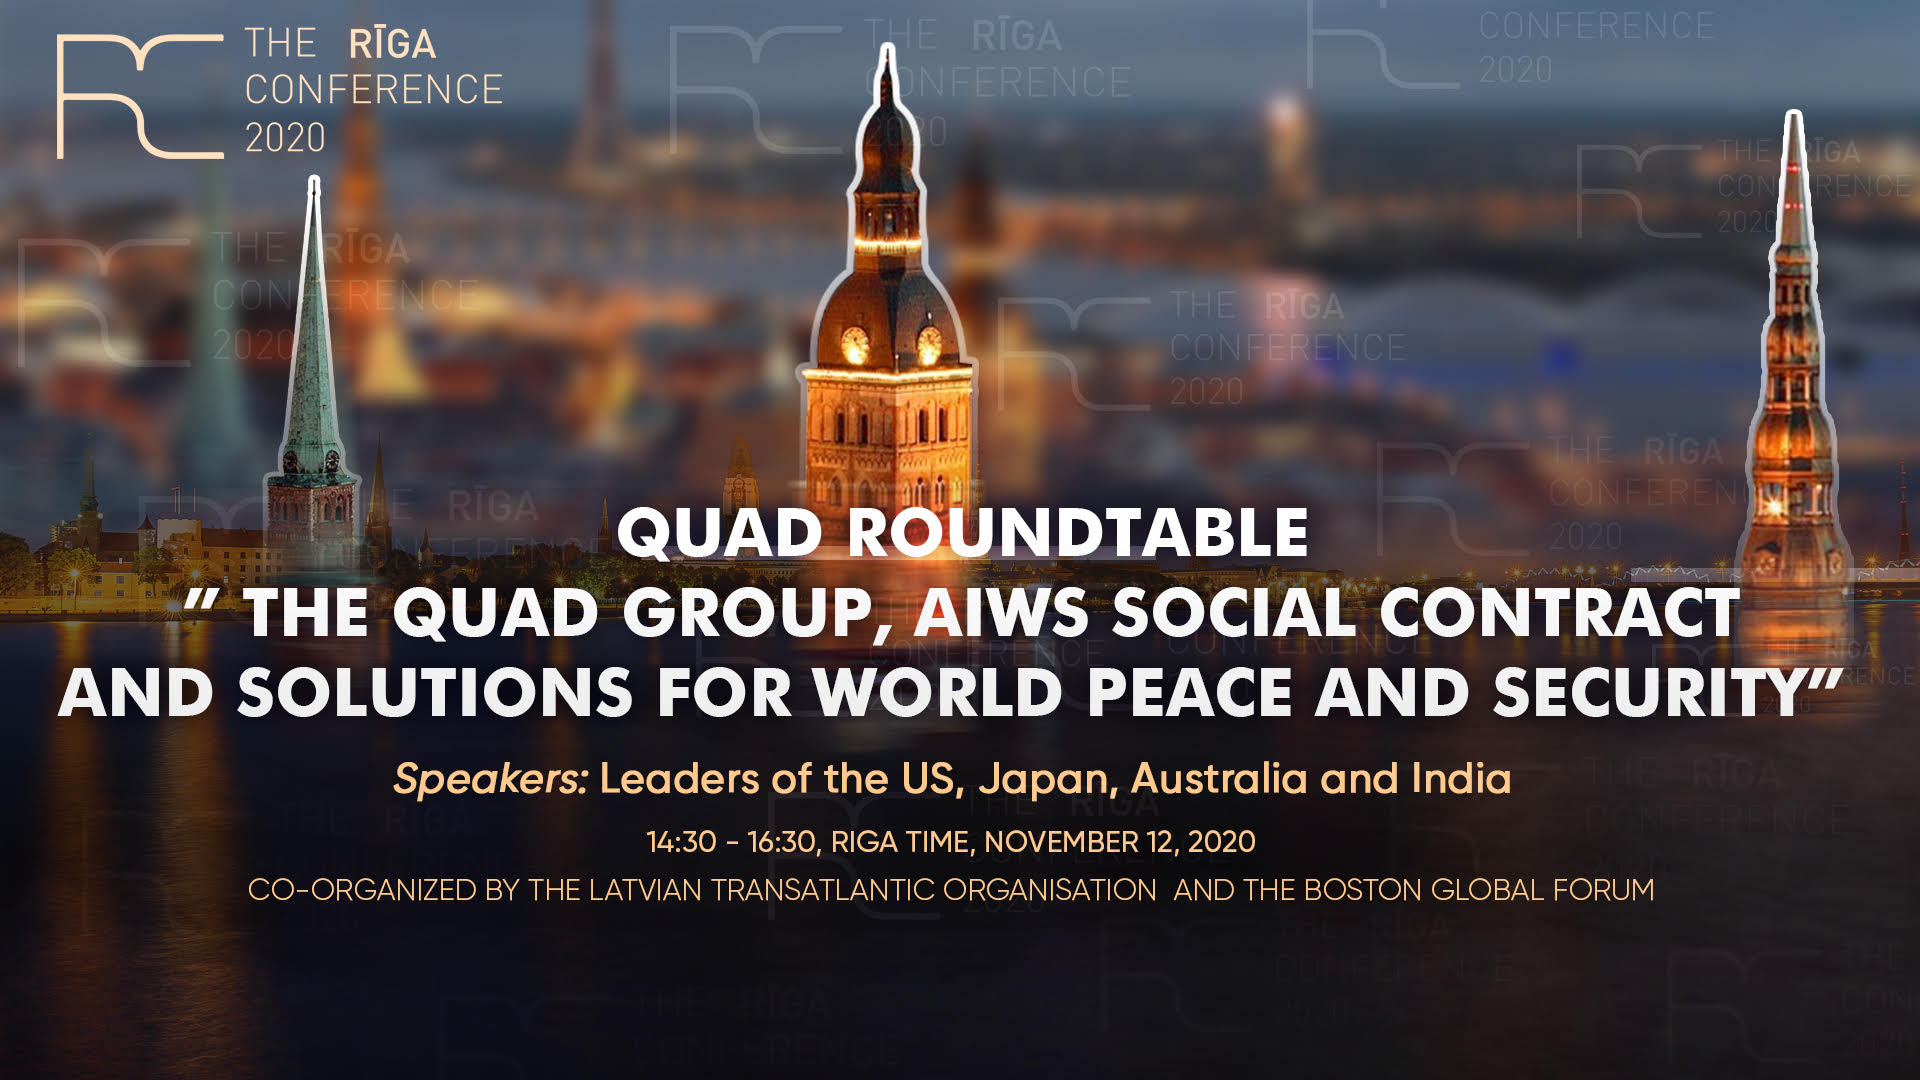 Special Side Event “Quad Roundtable” at the Riga Conference 2020